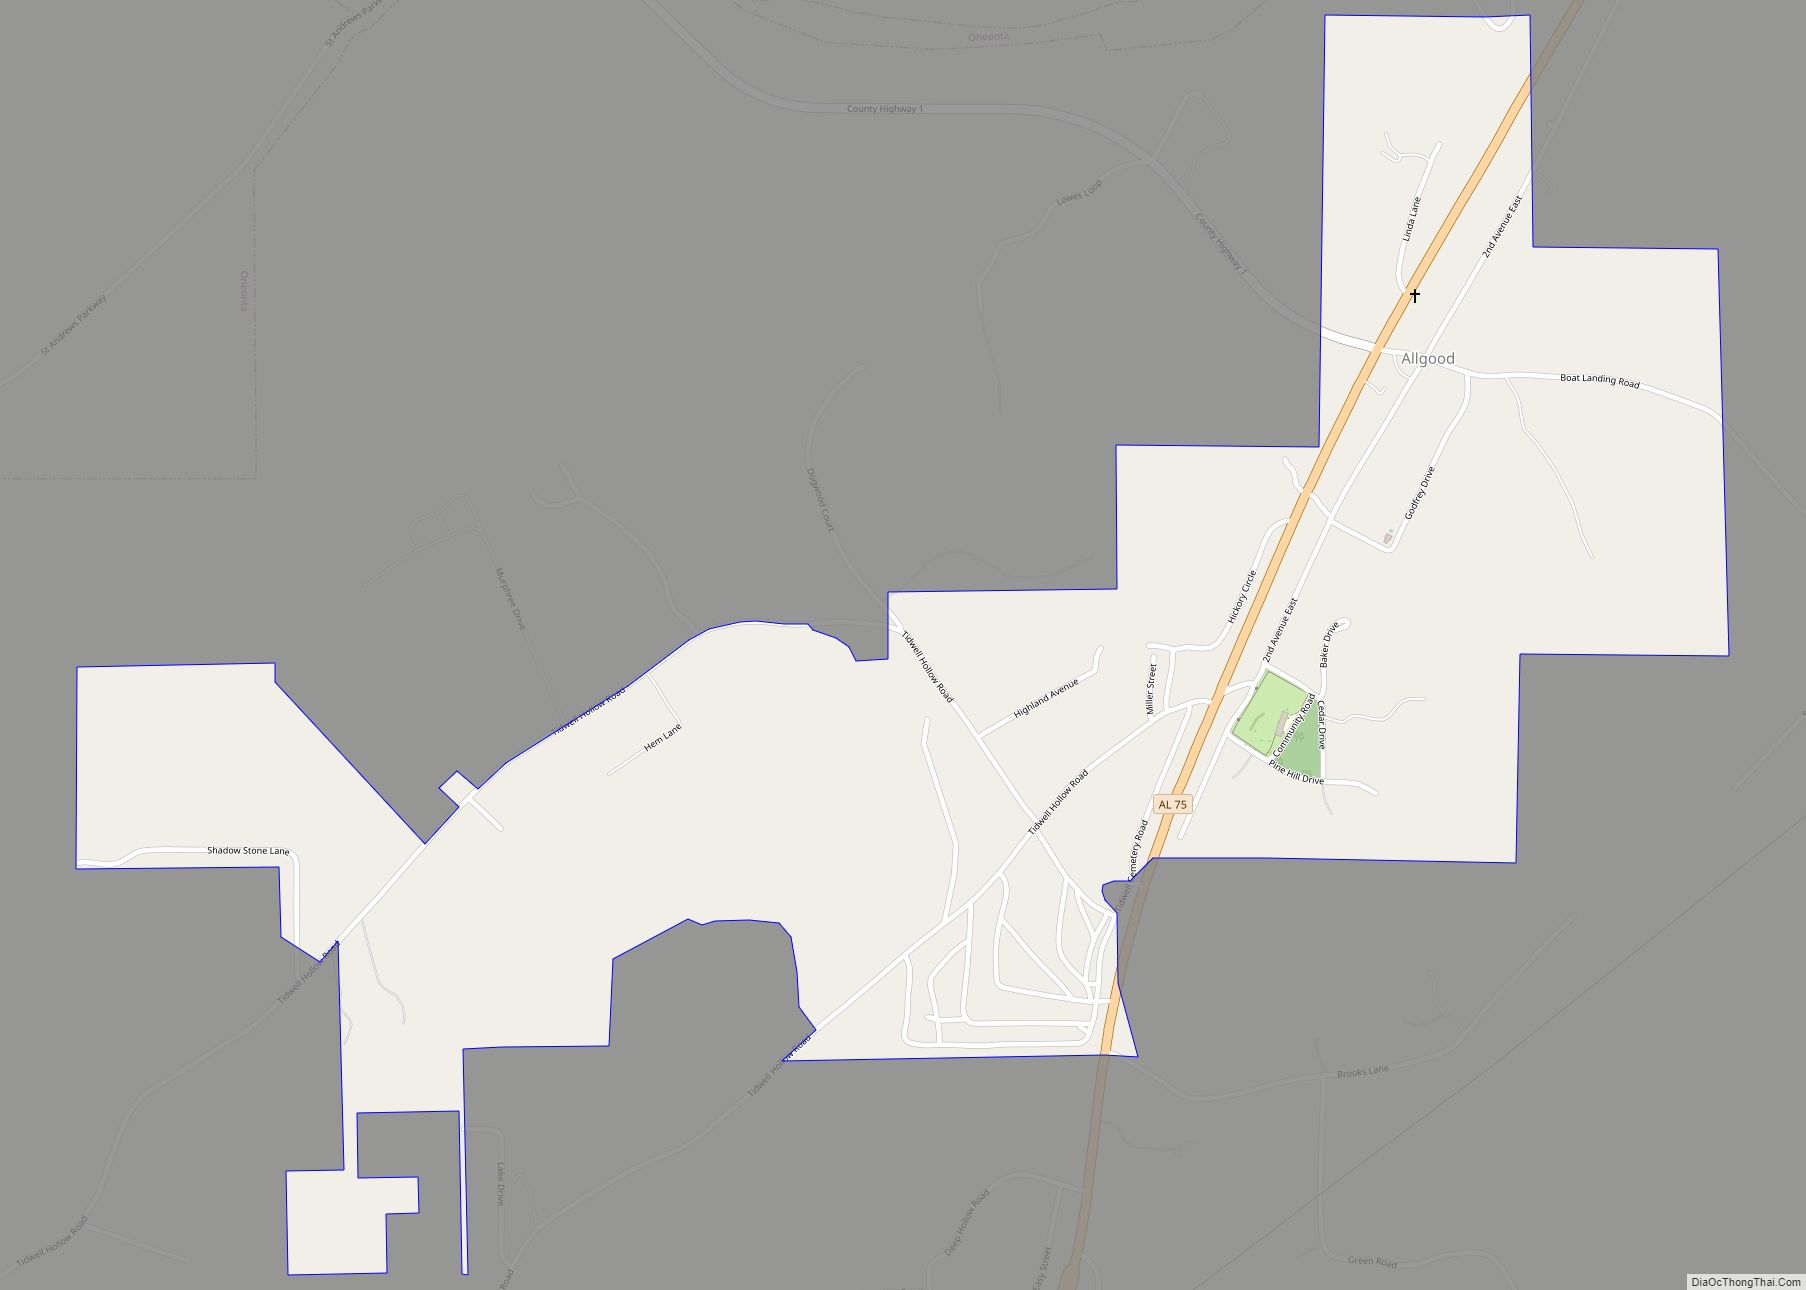 Map of Allgood town